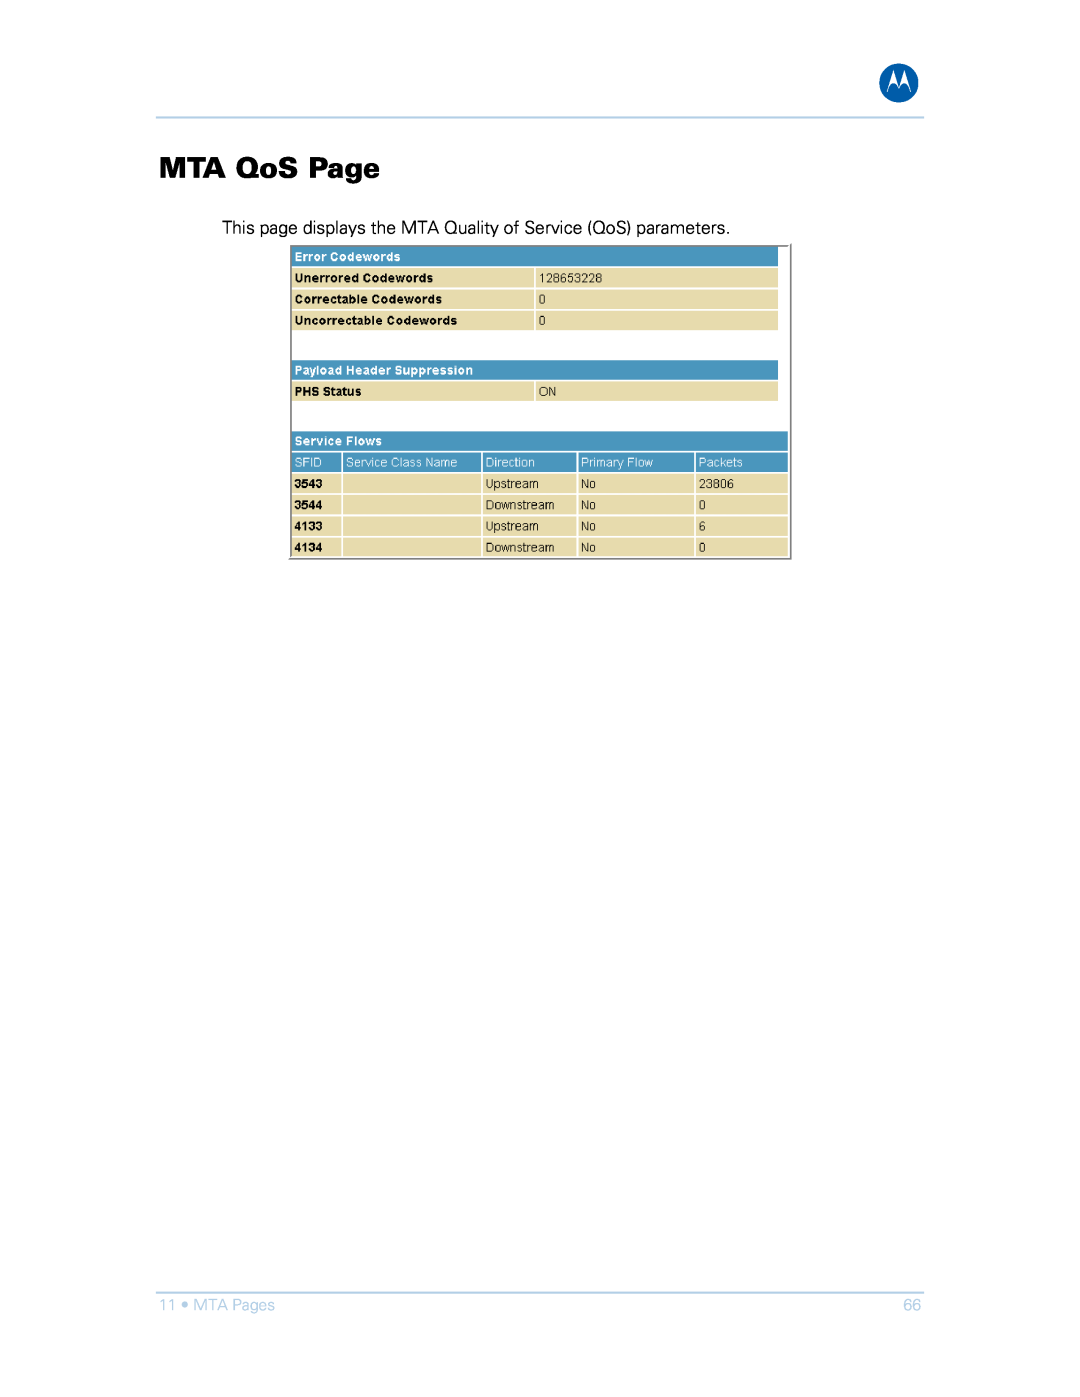 Motorola SVG1501UE, SVG1501E manual MTA QoS Page, This page displays the MTA Quality of Service QoS parameters, MTA Pages 